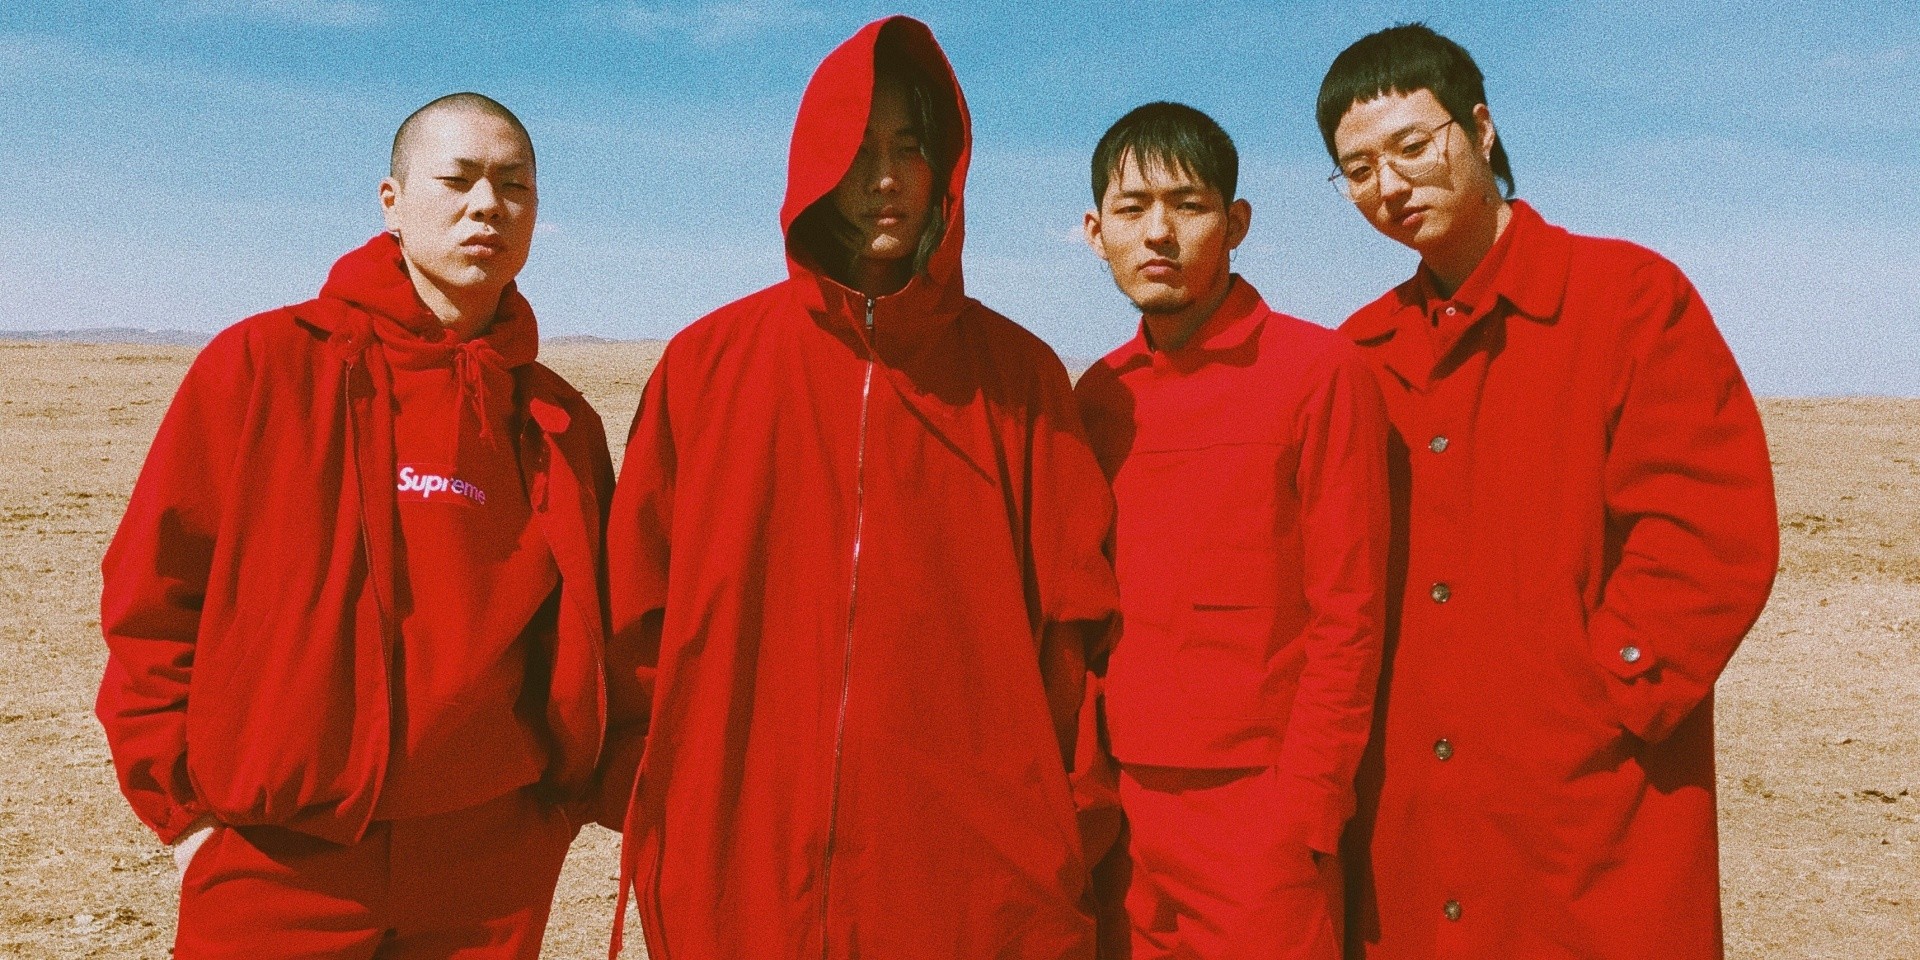 Hyukoh to play in Singapore next year